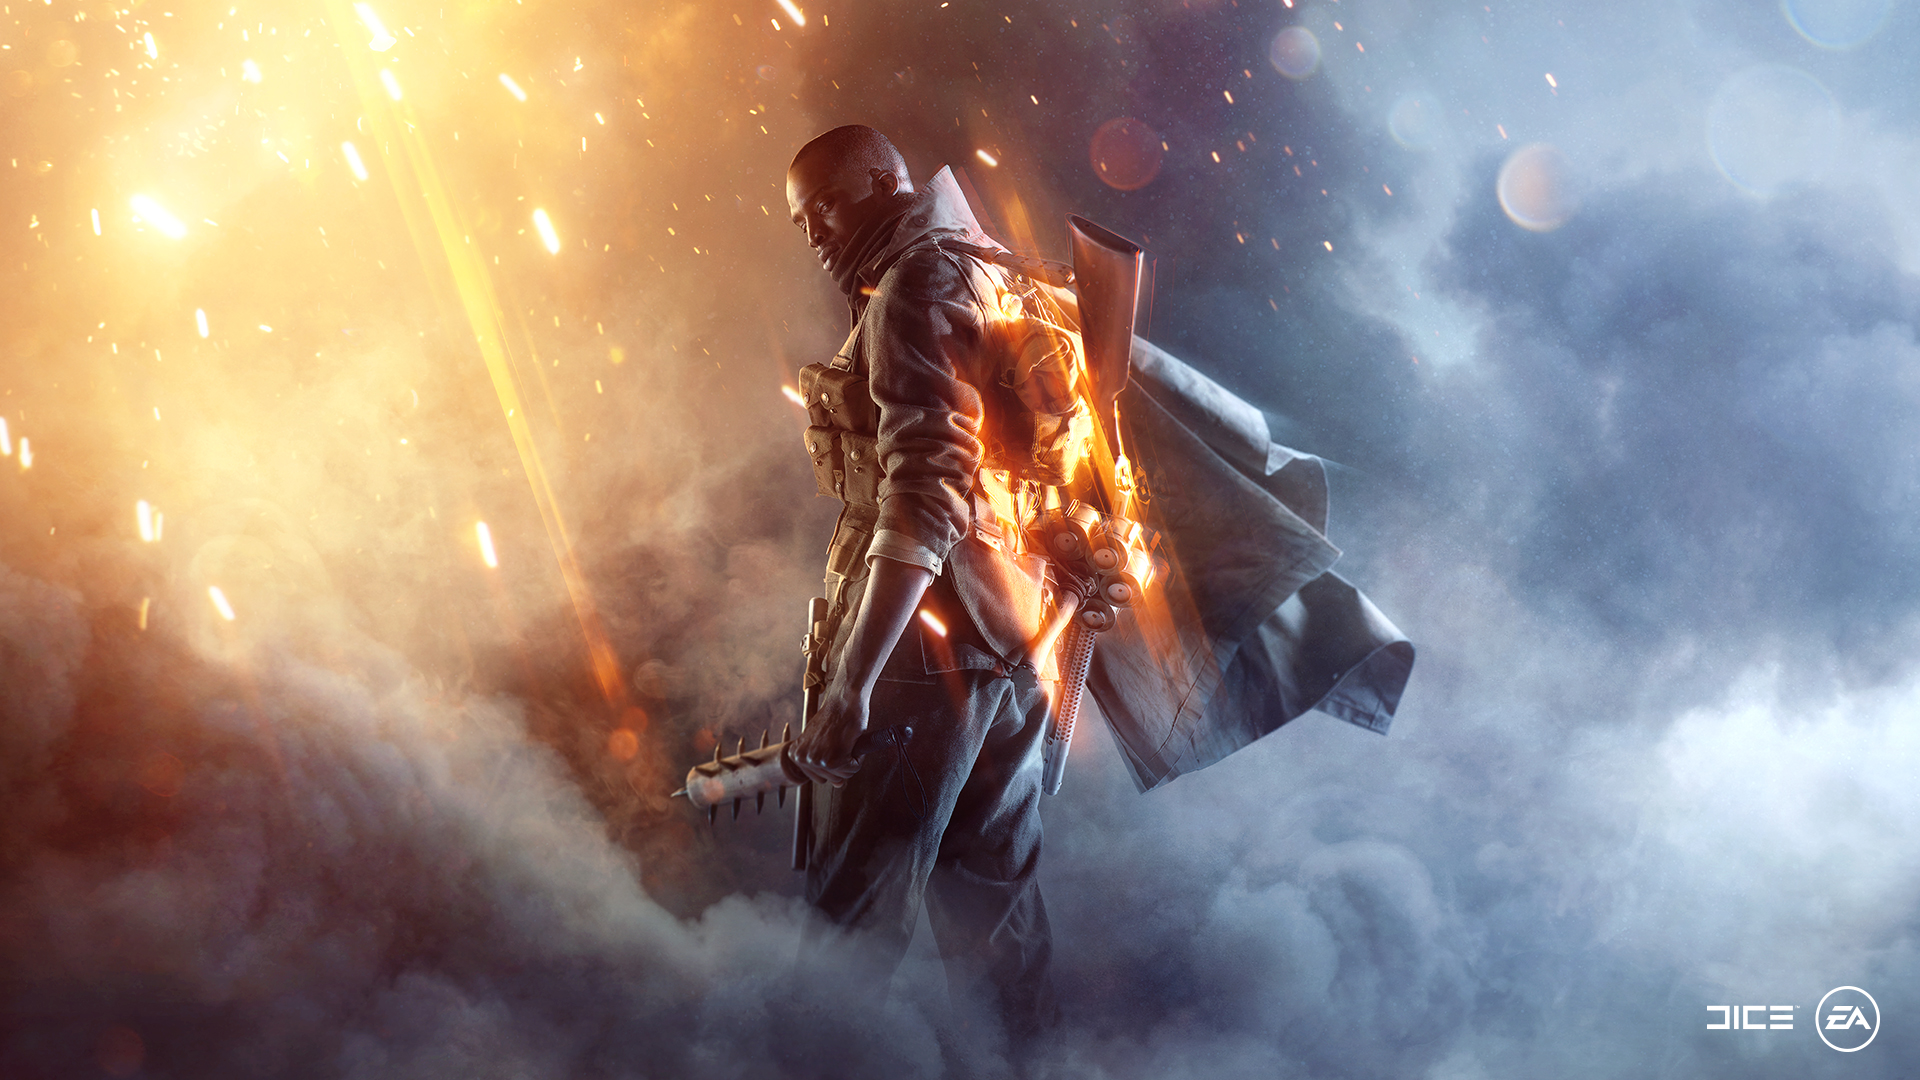 Battlefield 1 Wallpapers for PC, Mobile